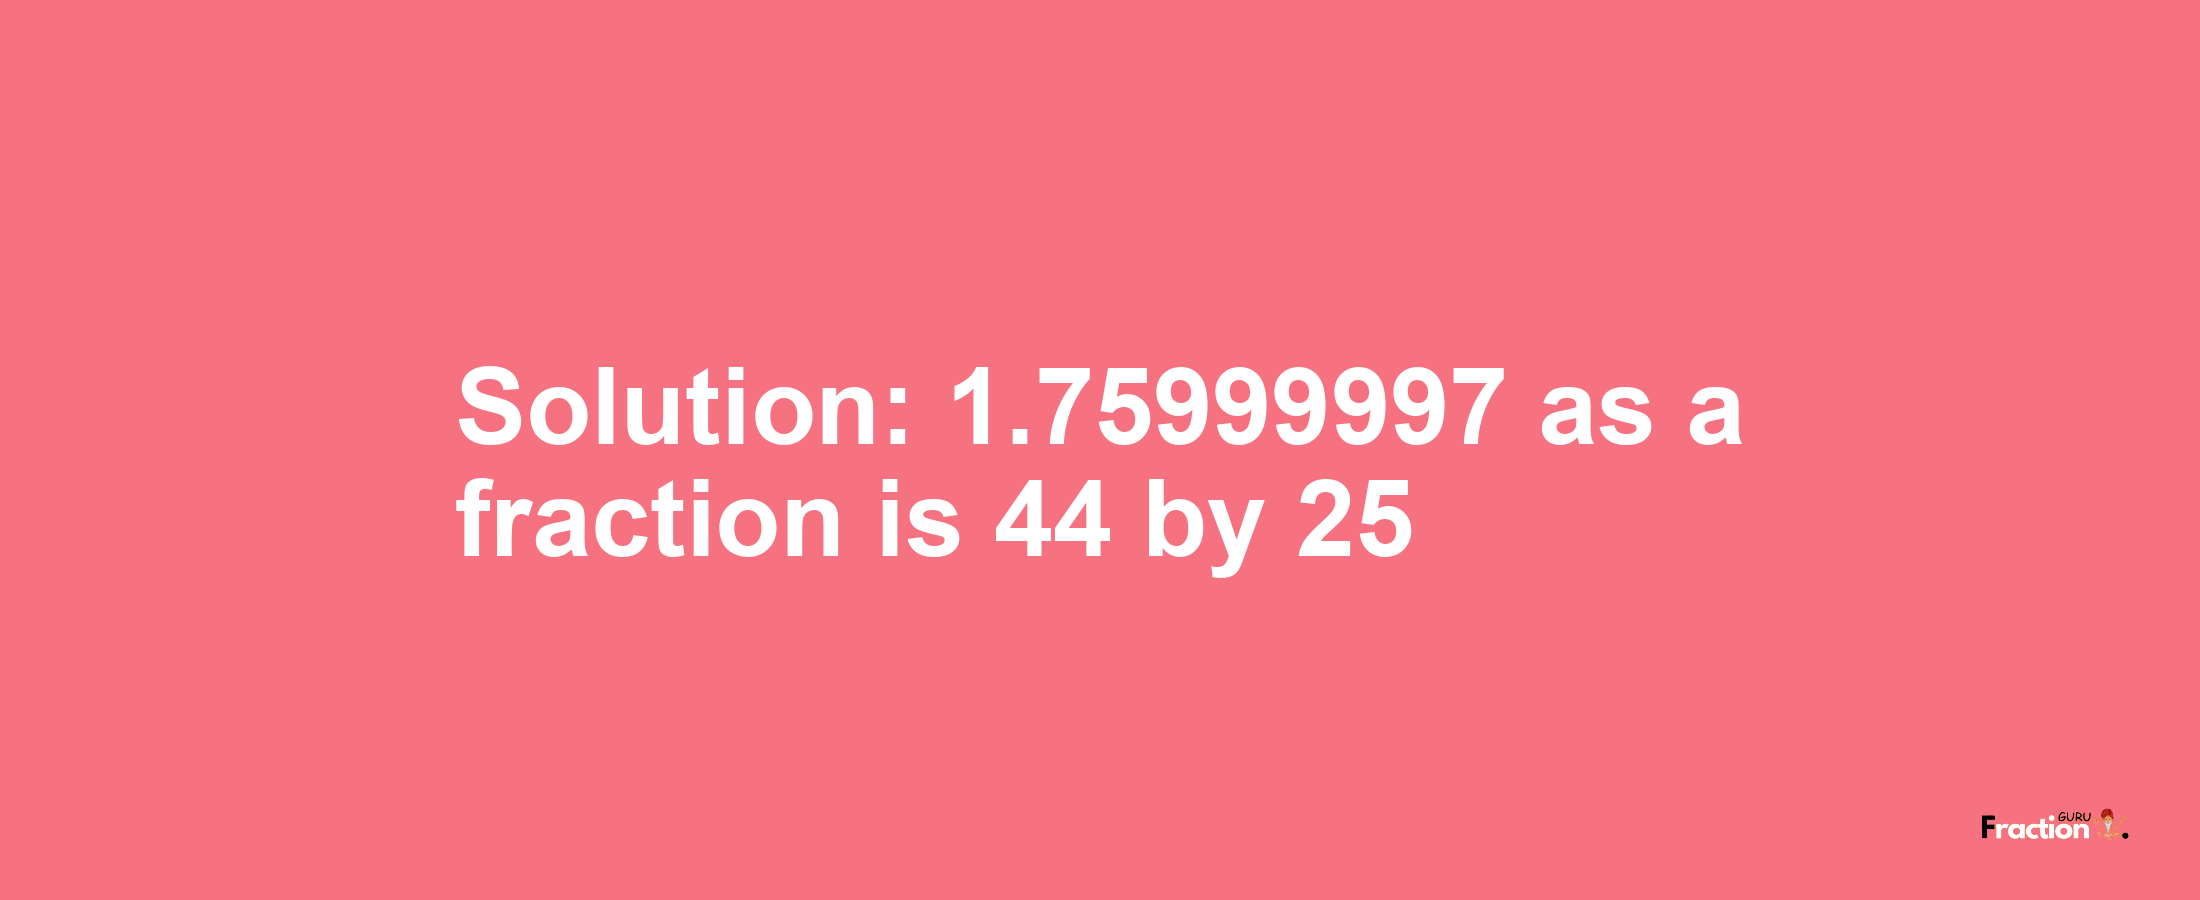 Solution:1.75999997 as a fraction is 44/25